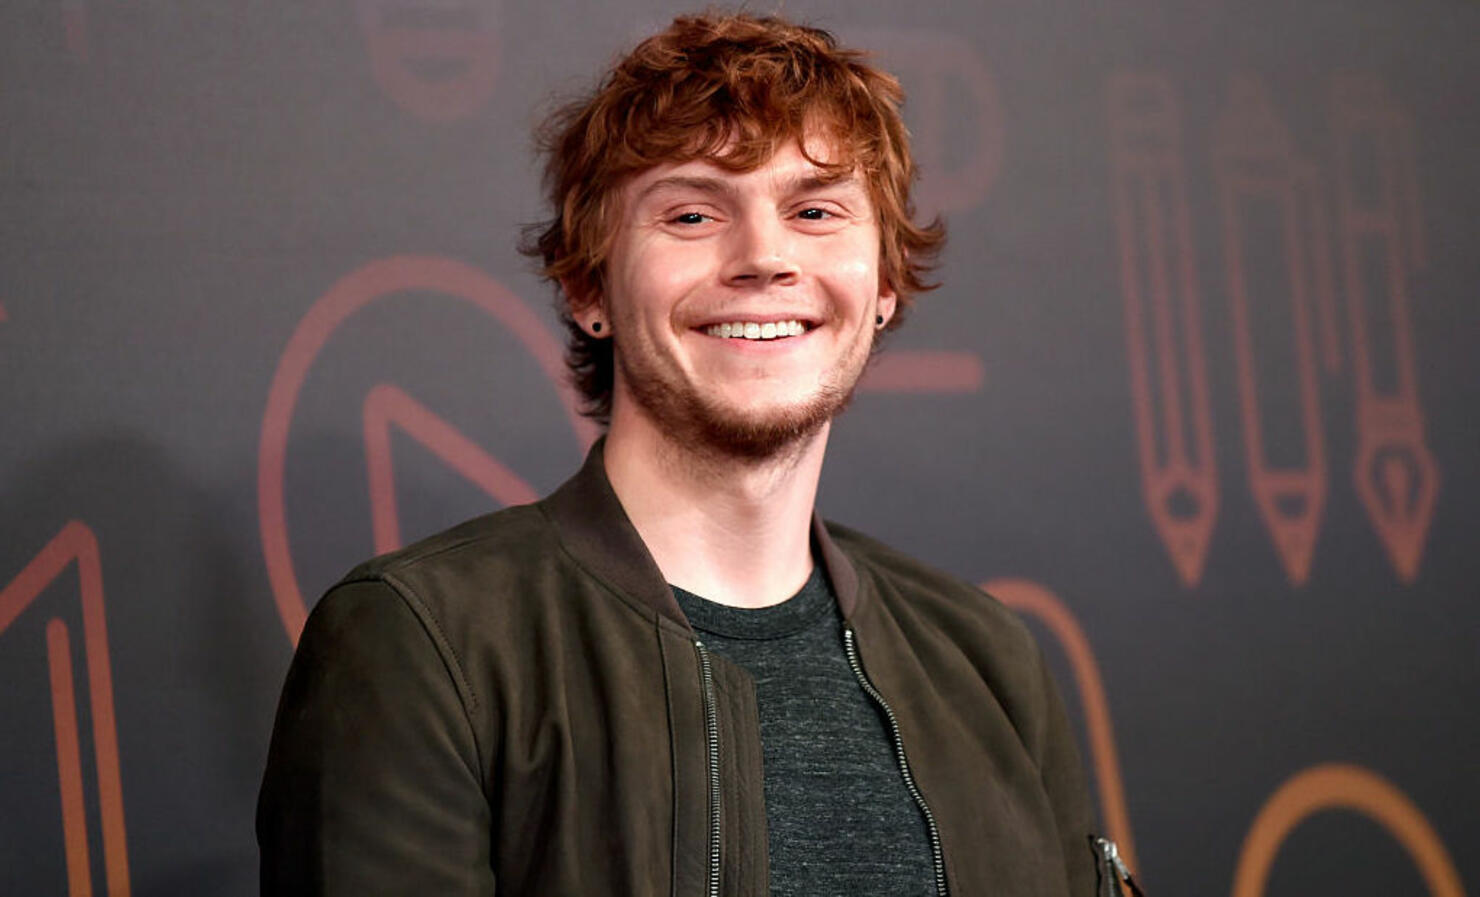 5. Evan Peters' Blue Hair Is the Most Dramatic Hair Change - wide 7